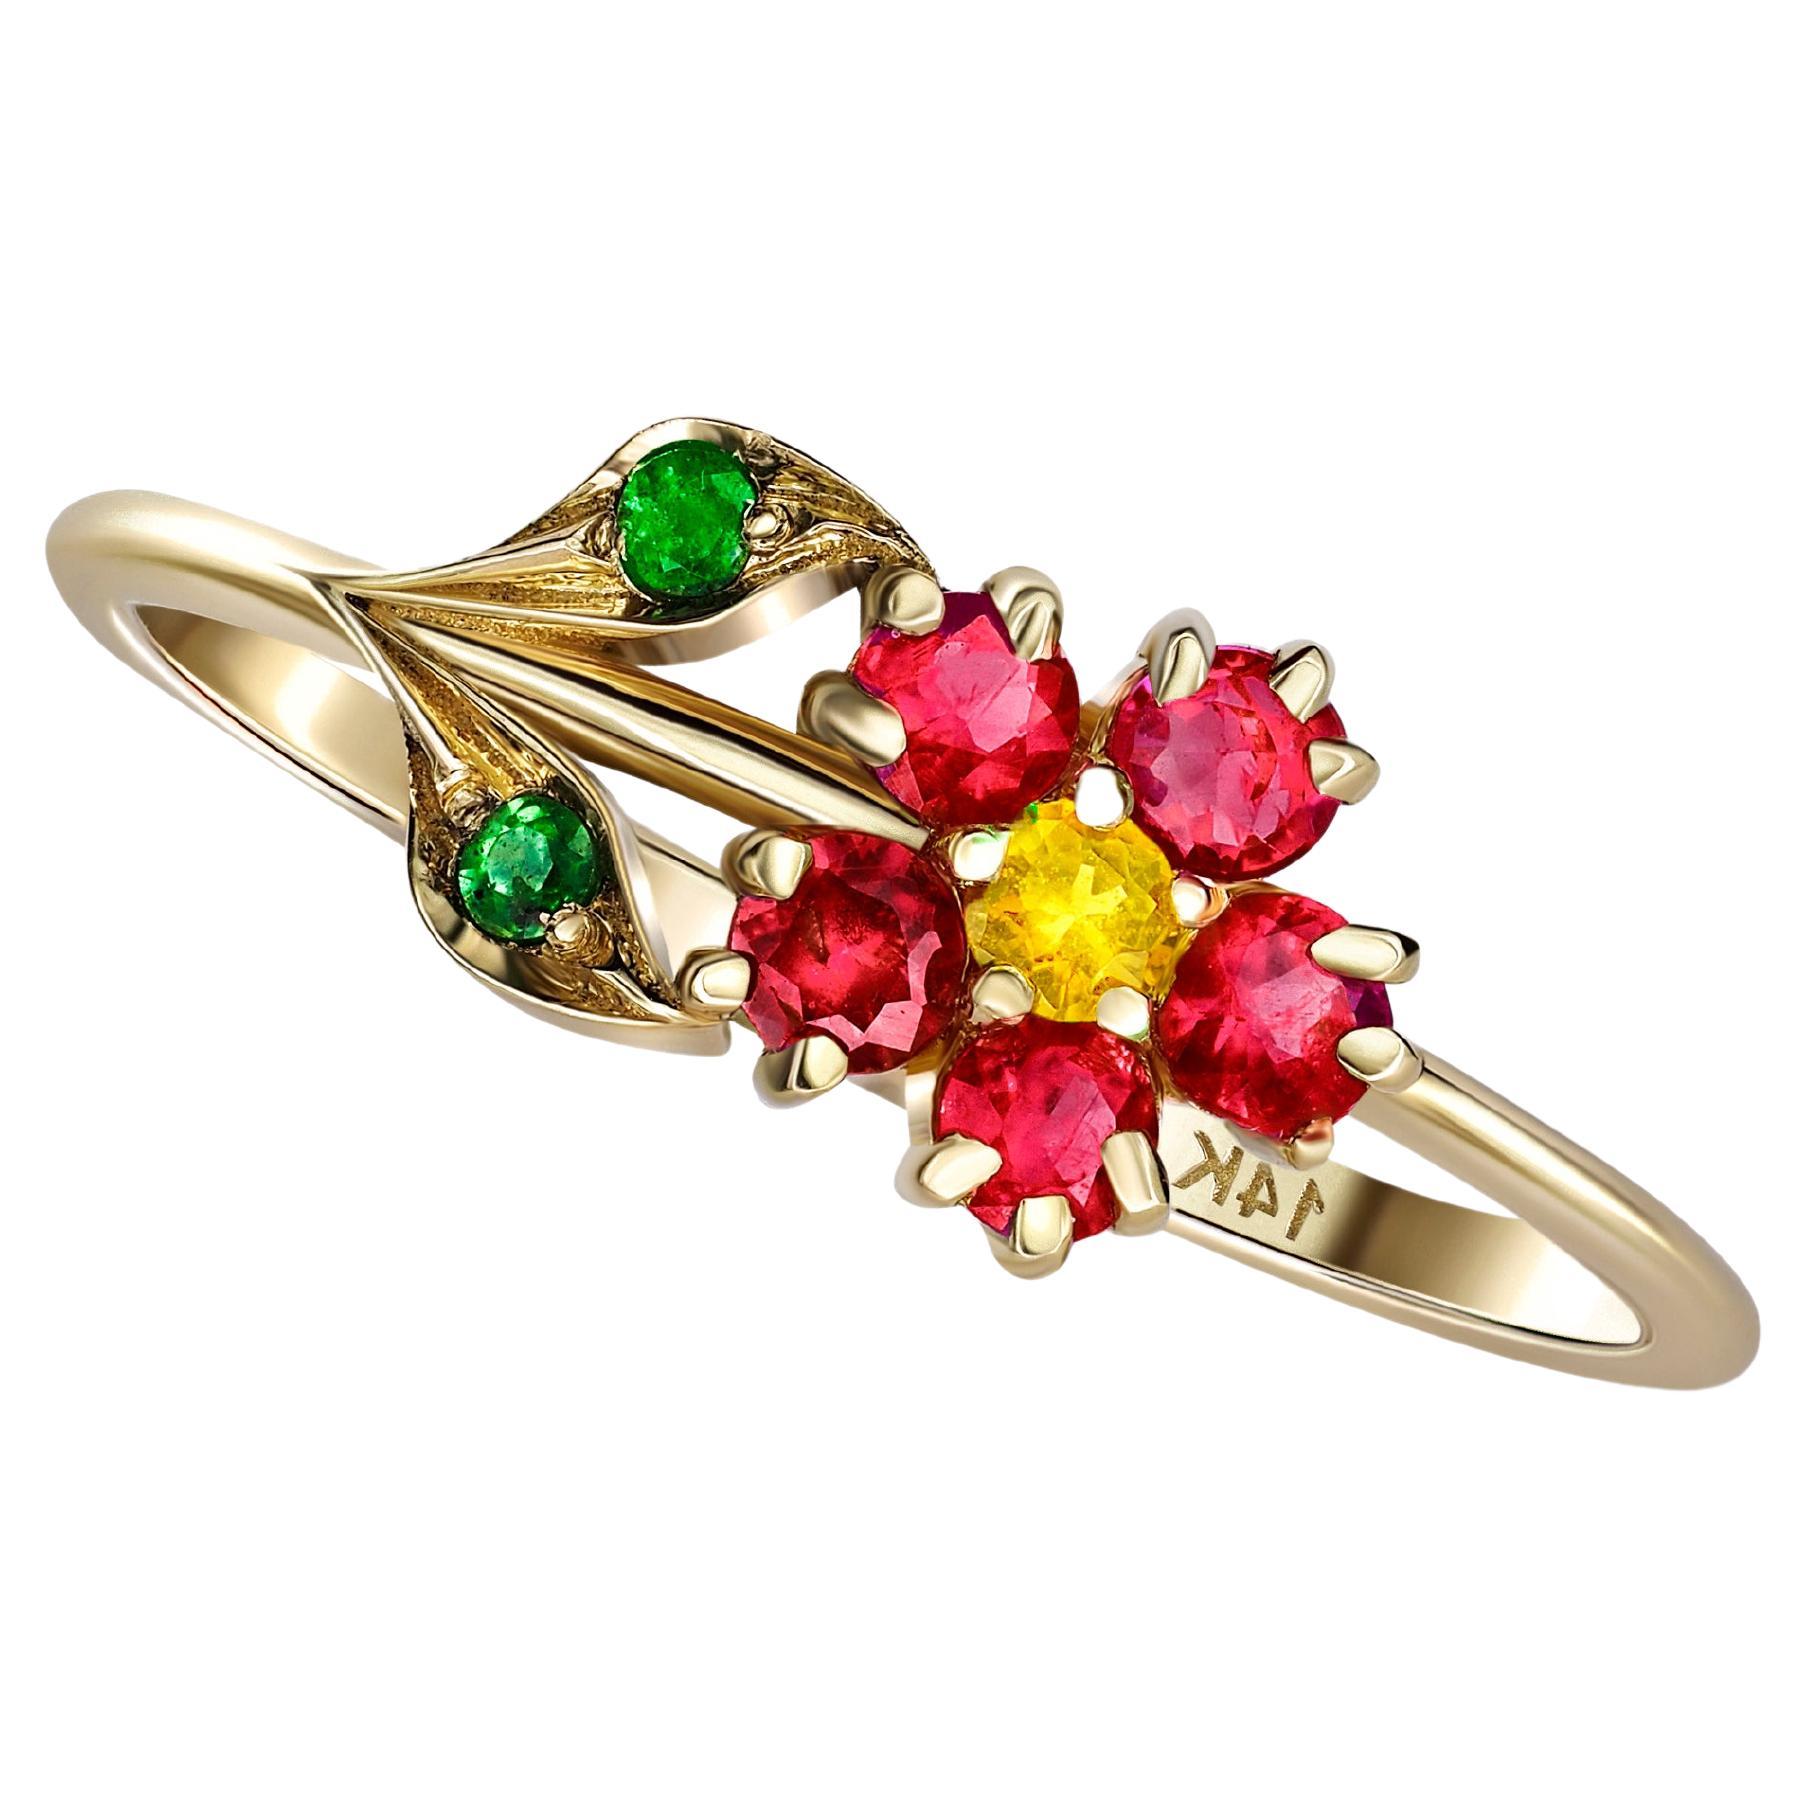 Flower Ring in 14 Karat Gold, Sapphire, Garnet and Chrome Diopsides Ring. 